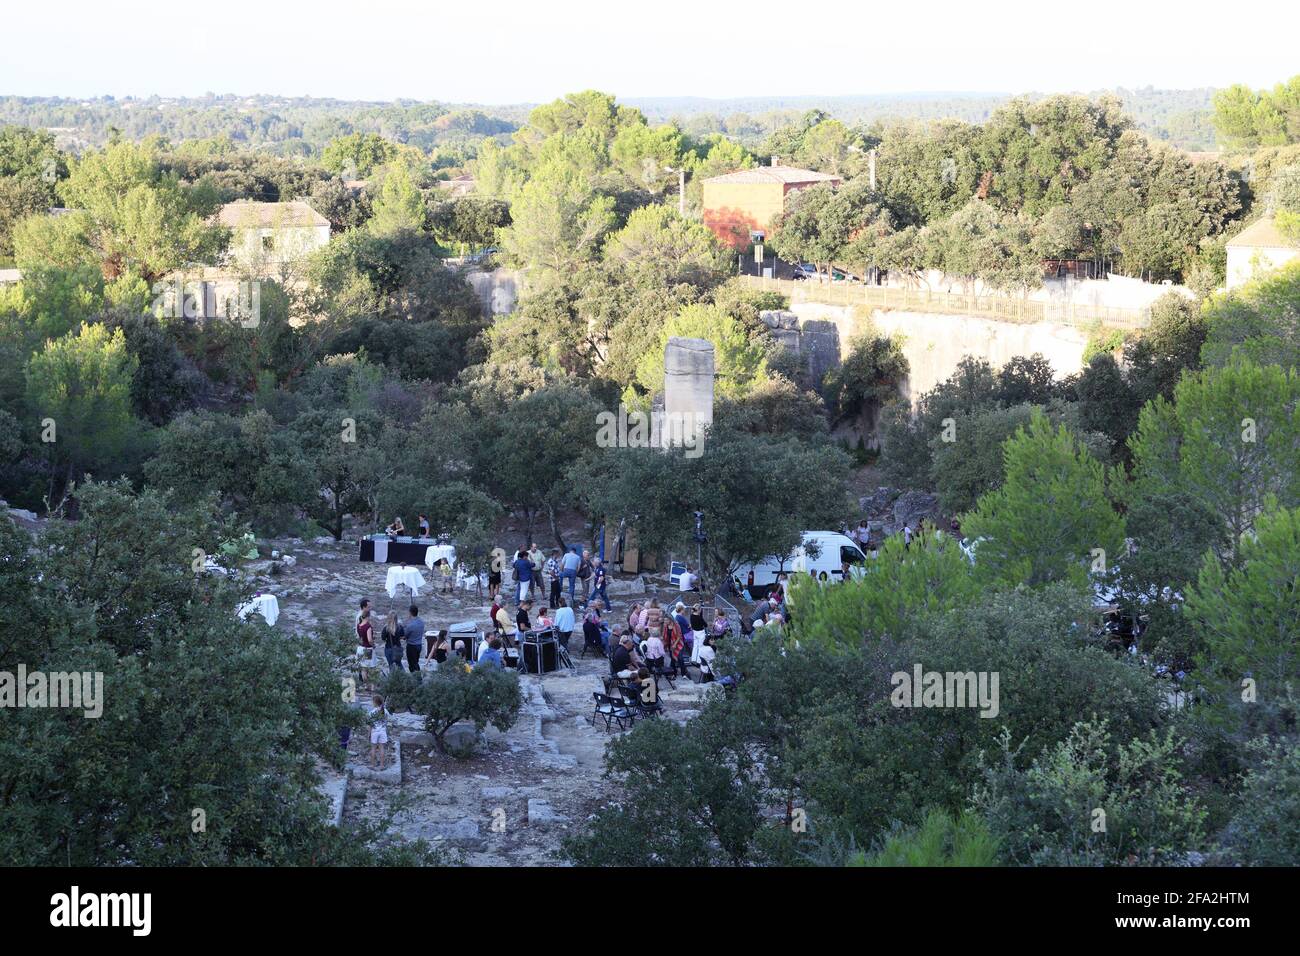 Preparations for open air Jazz Festival at Junas Quarries, Gard, Languedoc Roussillon, France Stock Photo